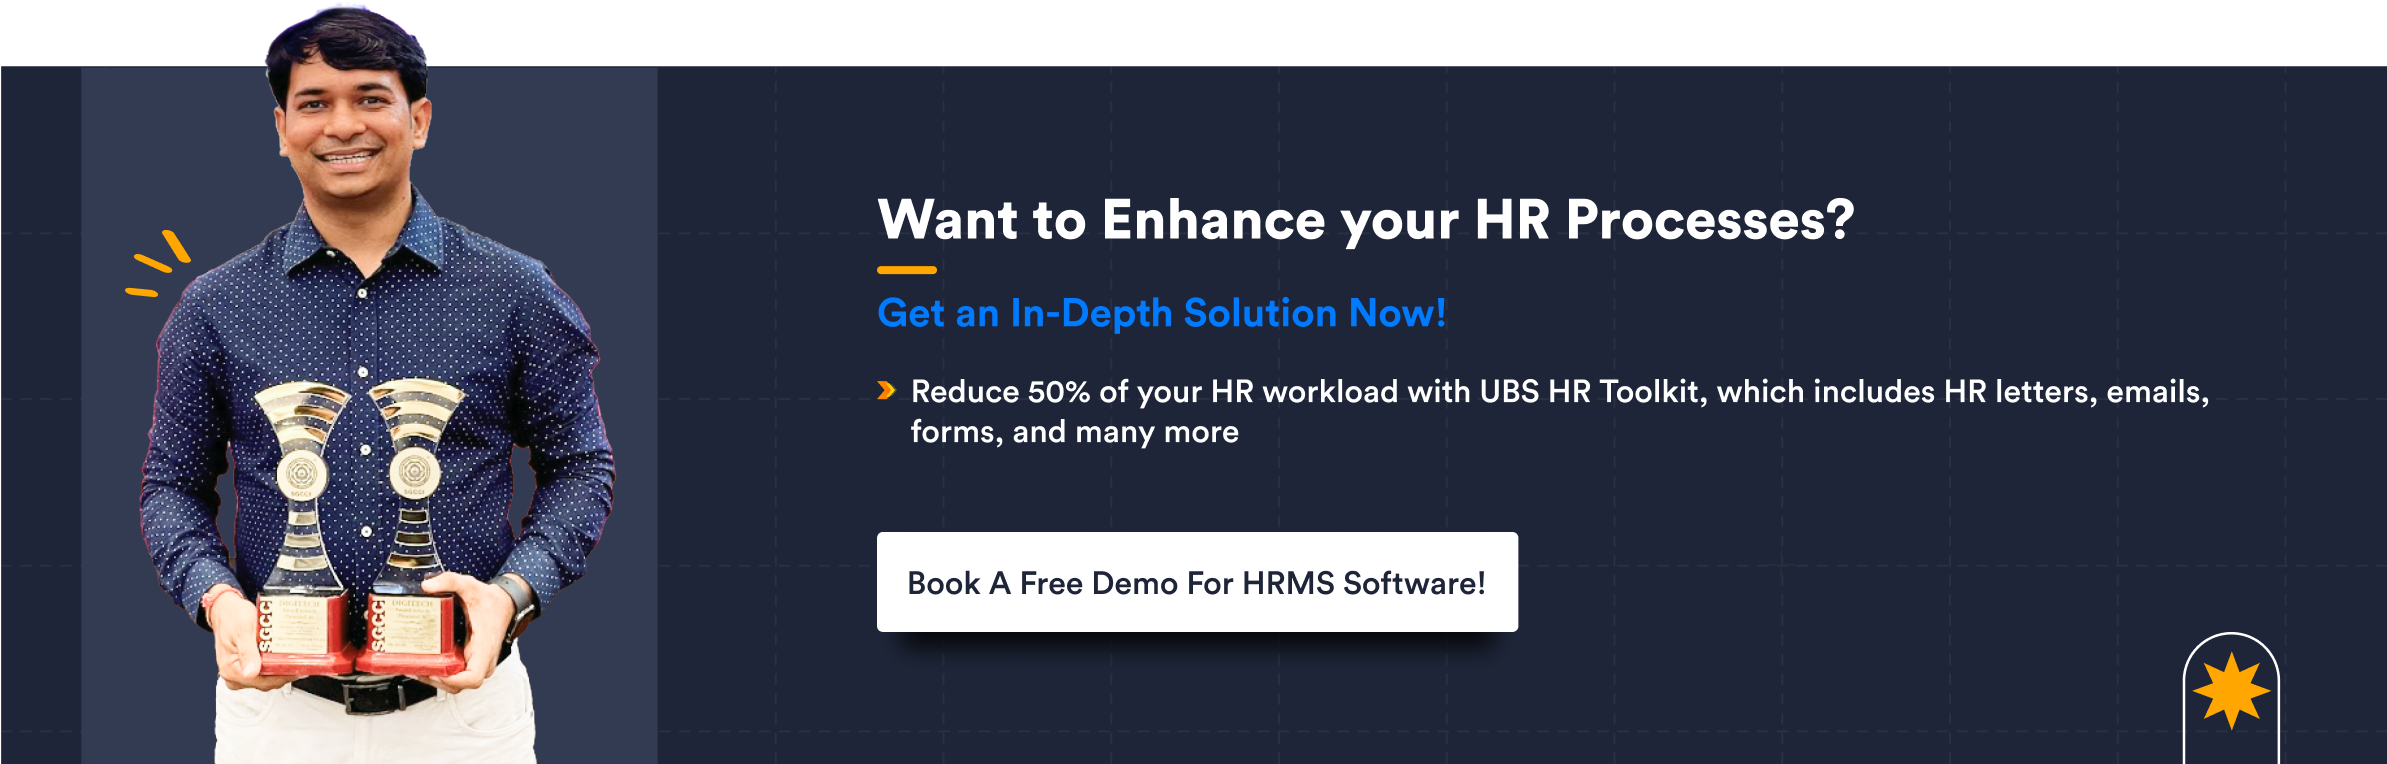 Want to Enhance your HR Processes 1 1